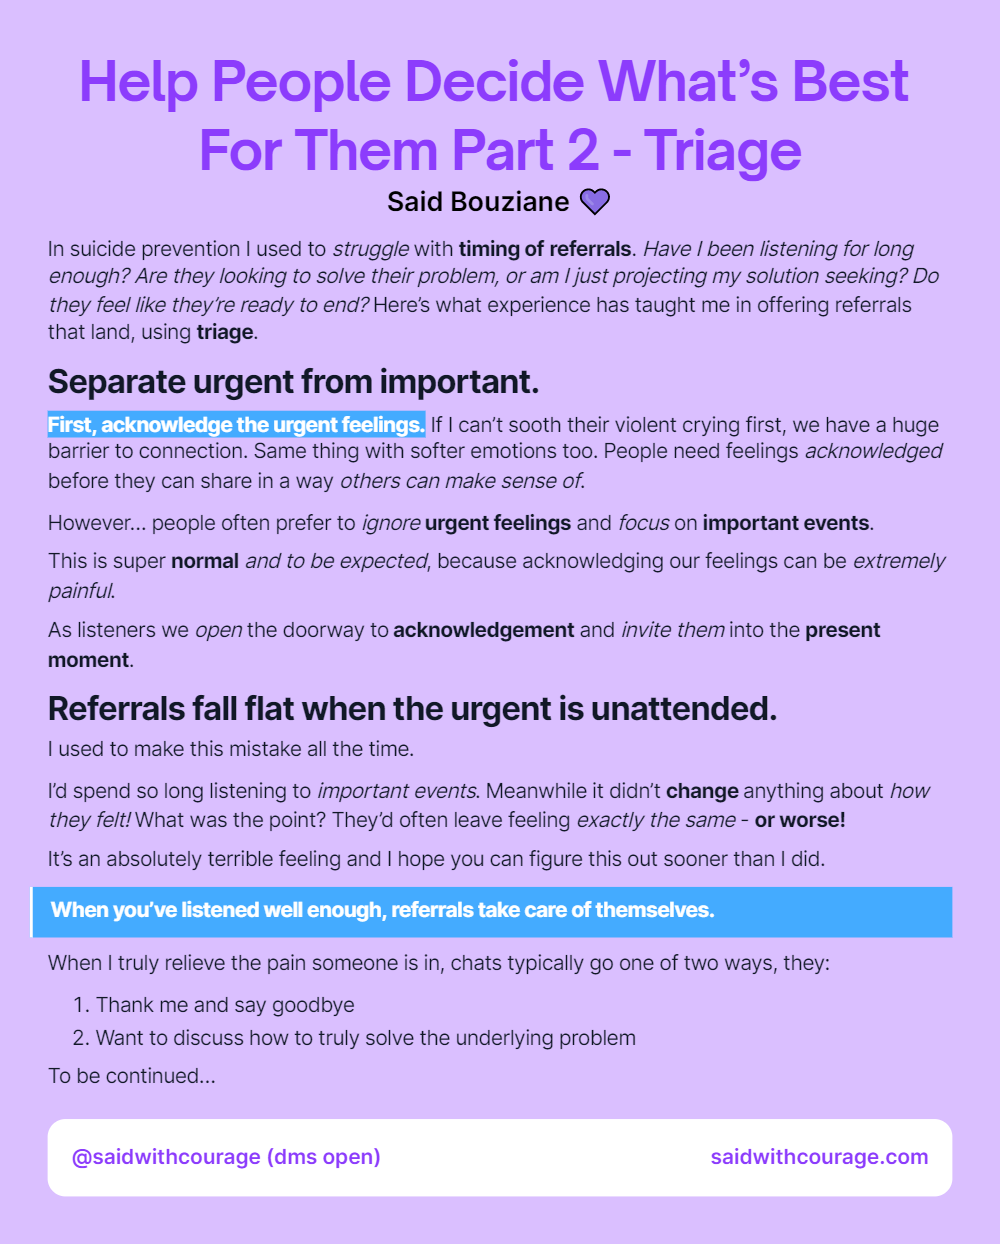 Help People Decide What’s Best For Them Part 2 – Triage